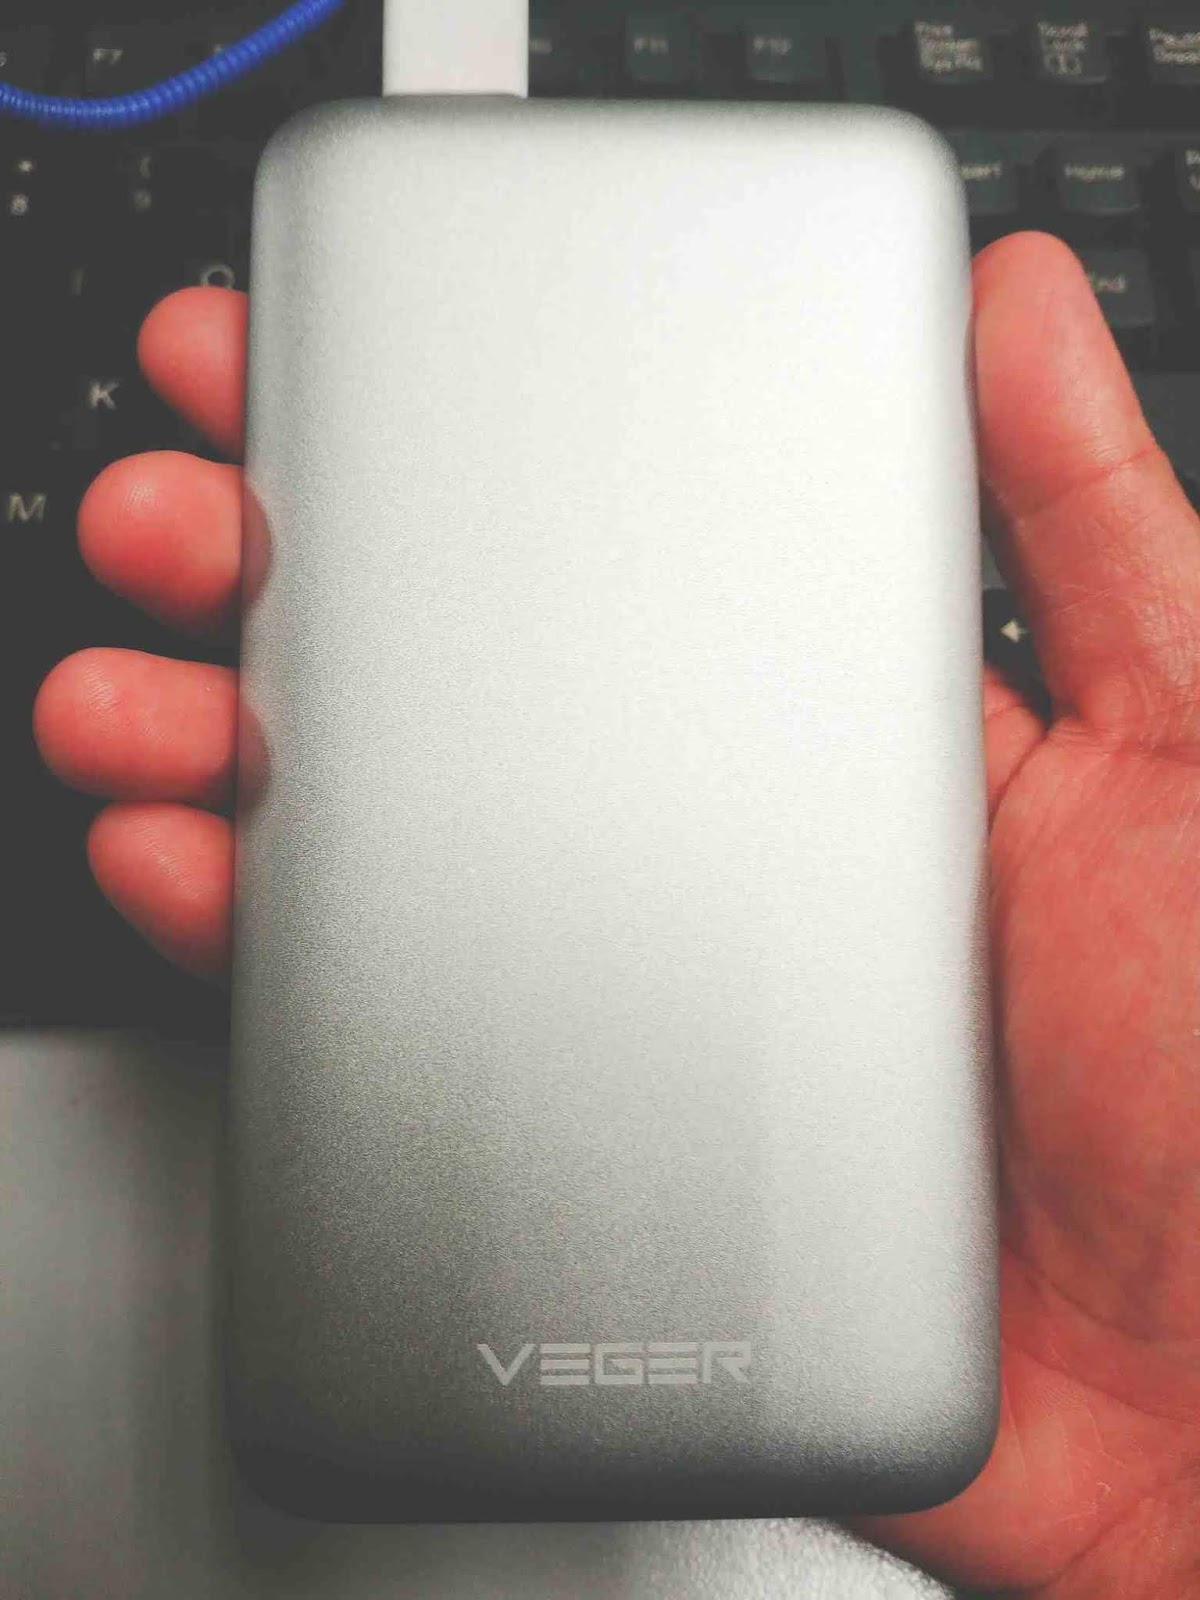 Putting the Veger VP-1015 10,000 mAh to the test